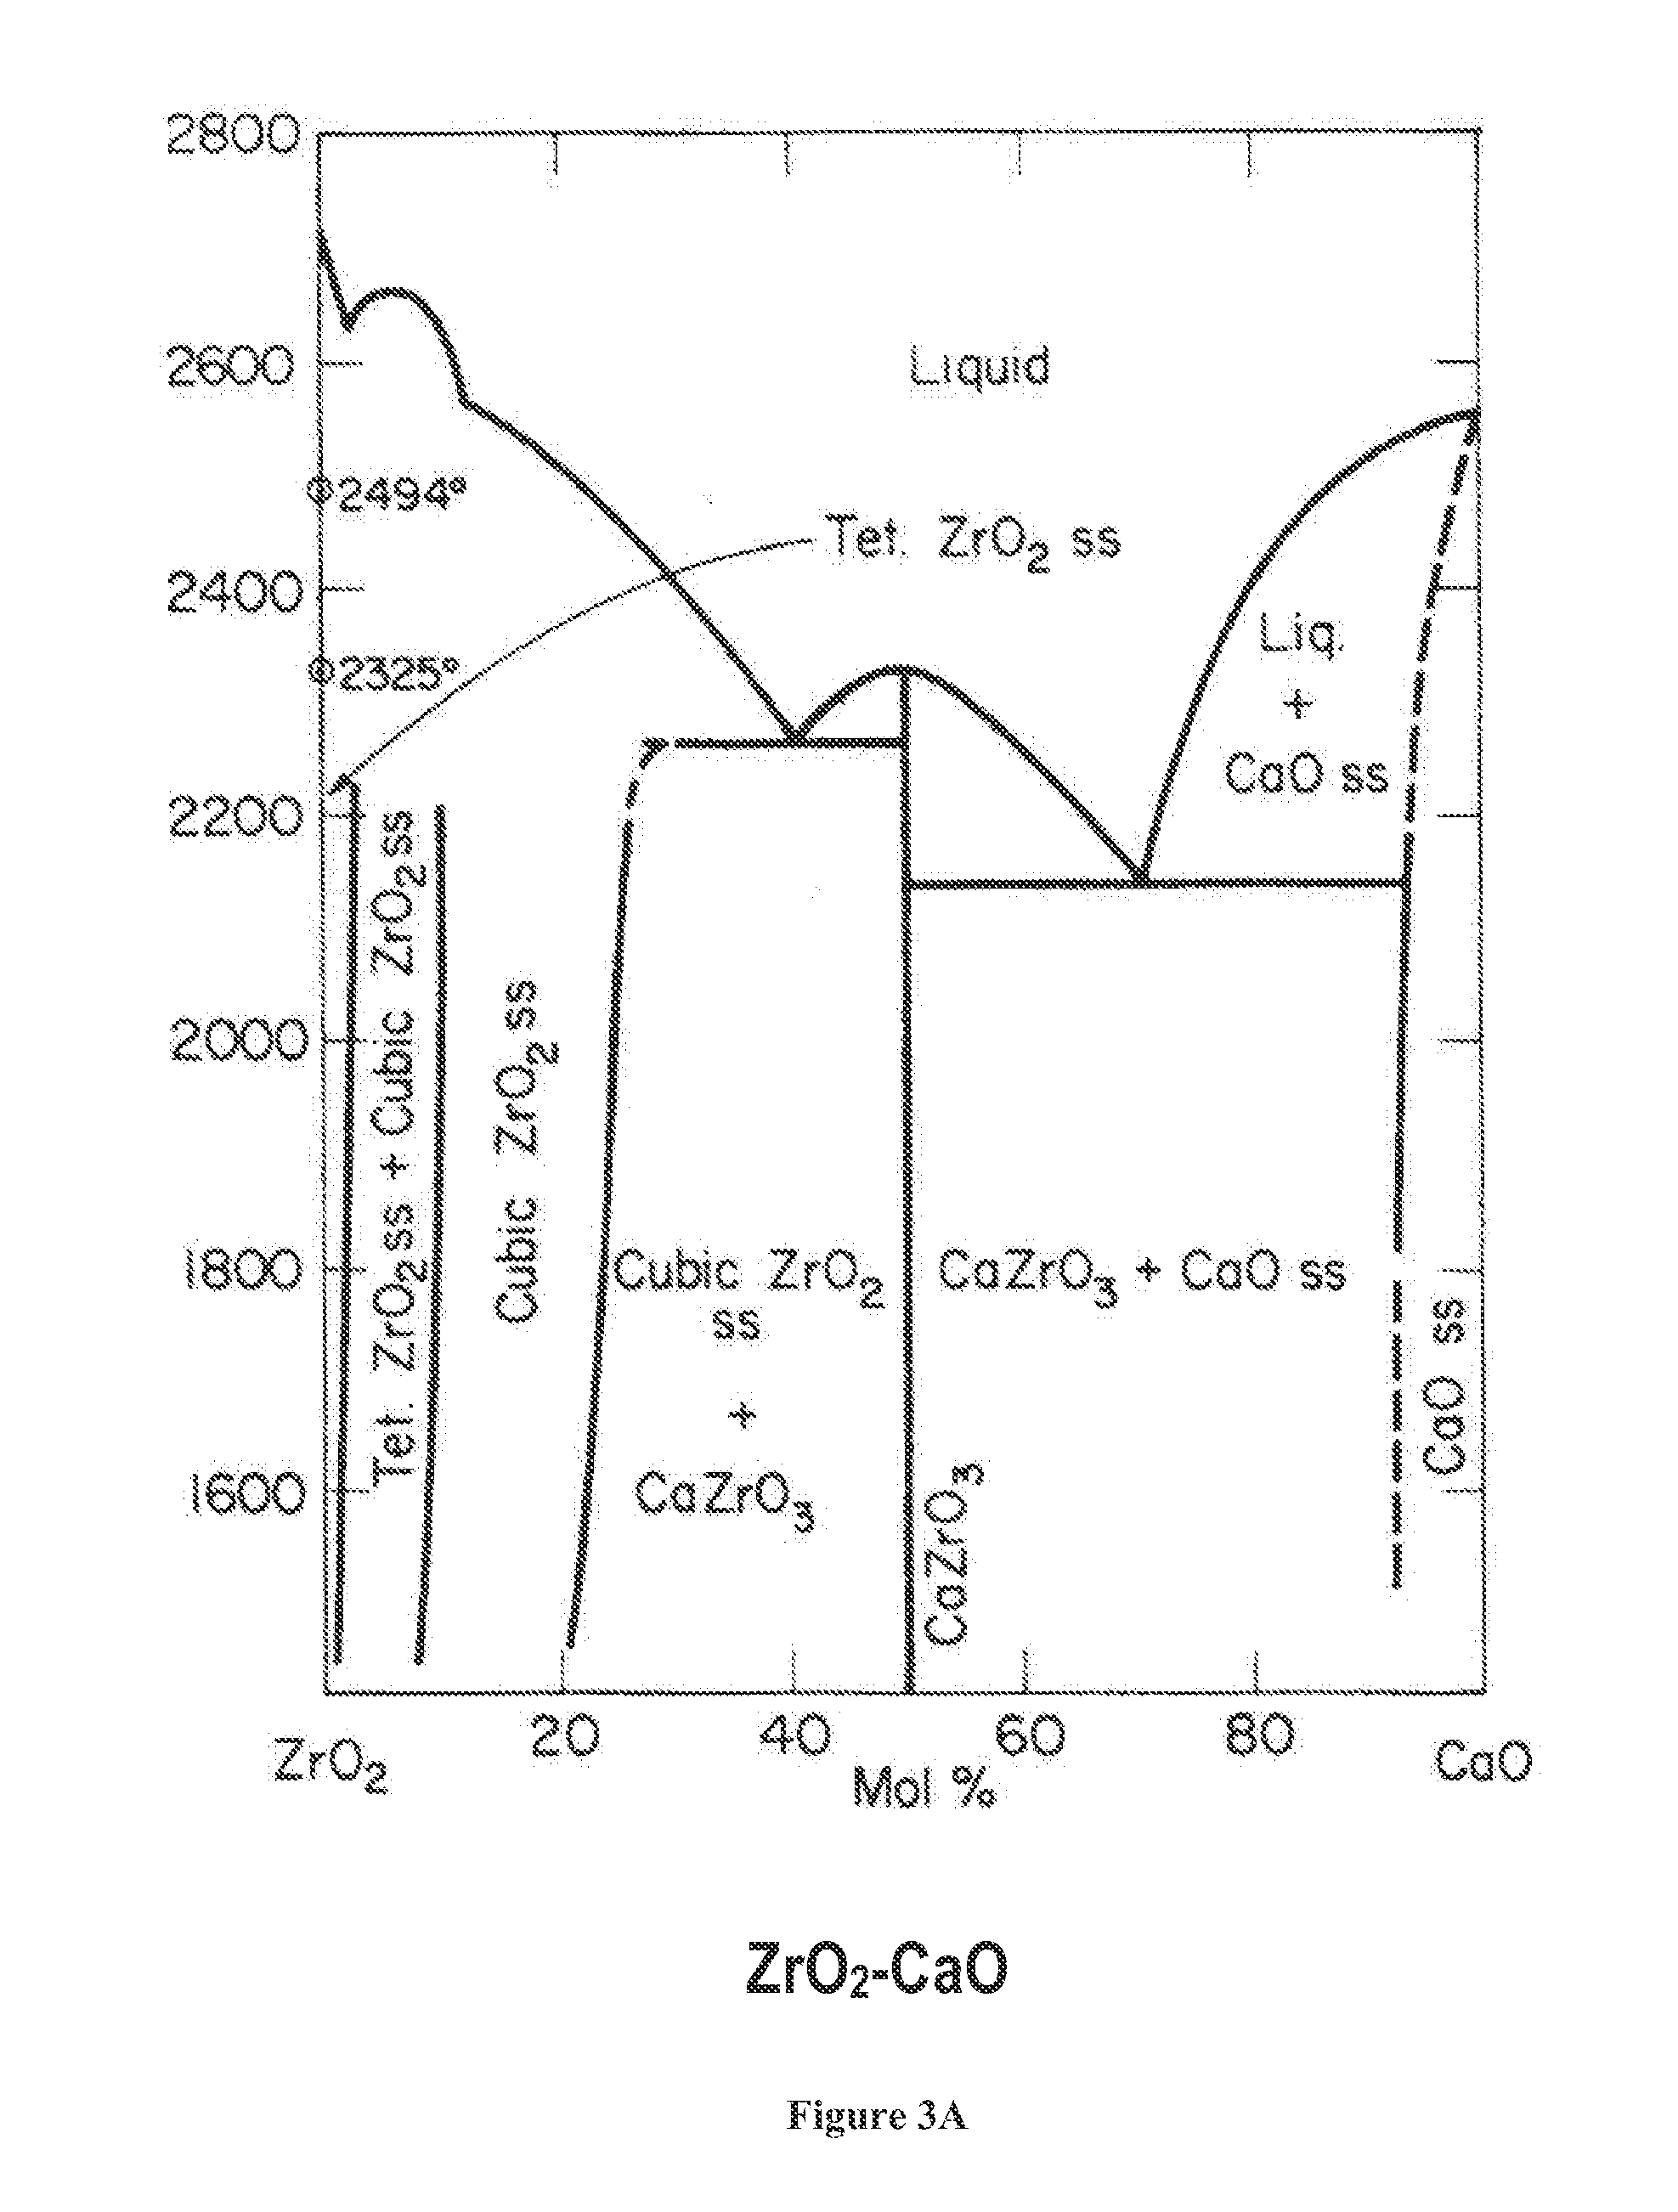 High Temperature Catalysts for Decomposition of Liquid Monopropellants and Methods for Producing the Same